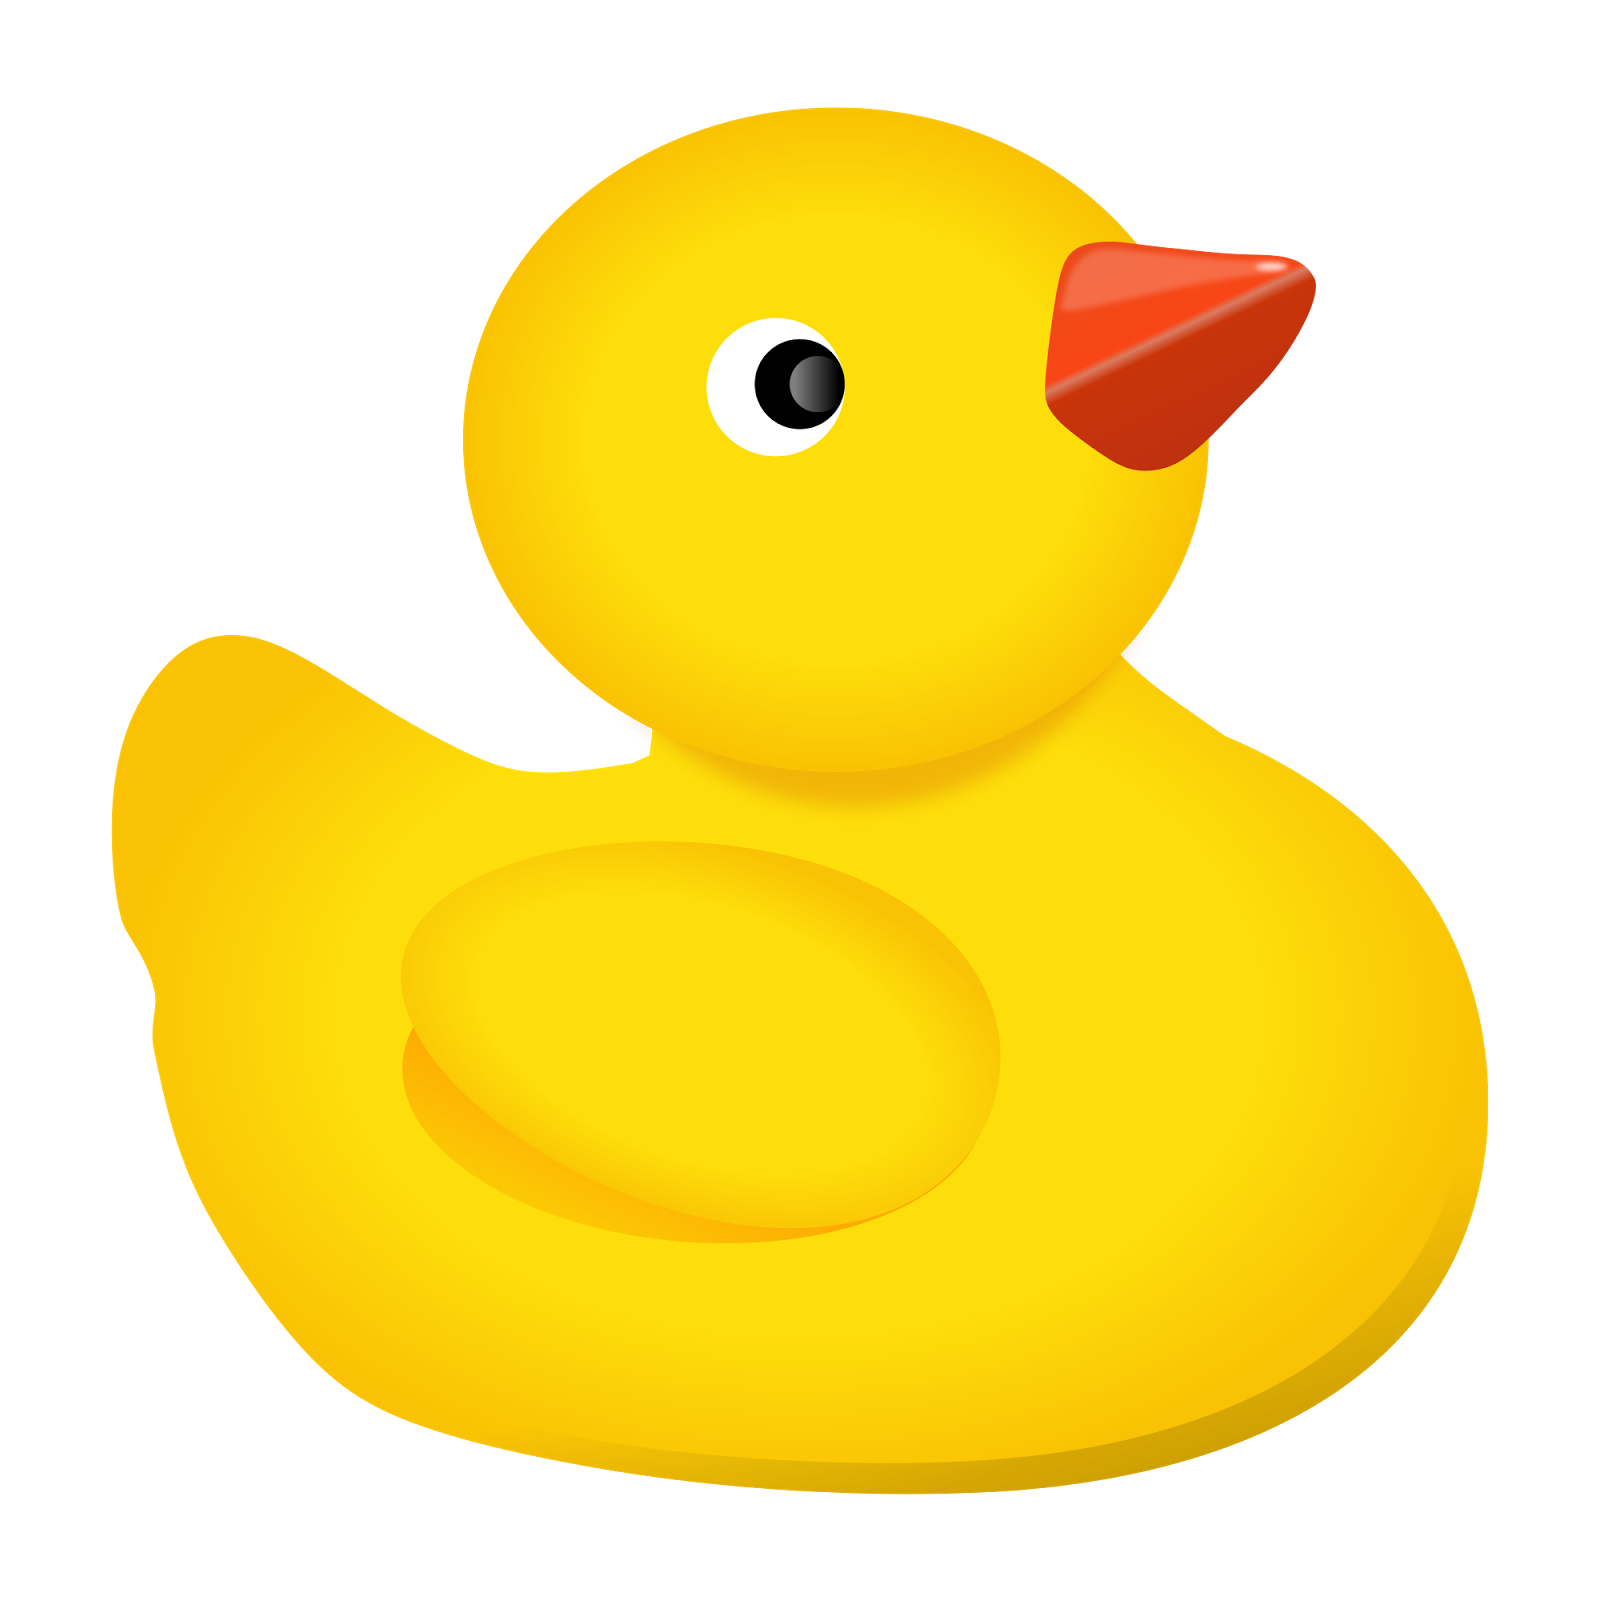 Rubber png image with. Ducks clipart toy duck